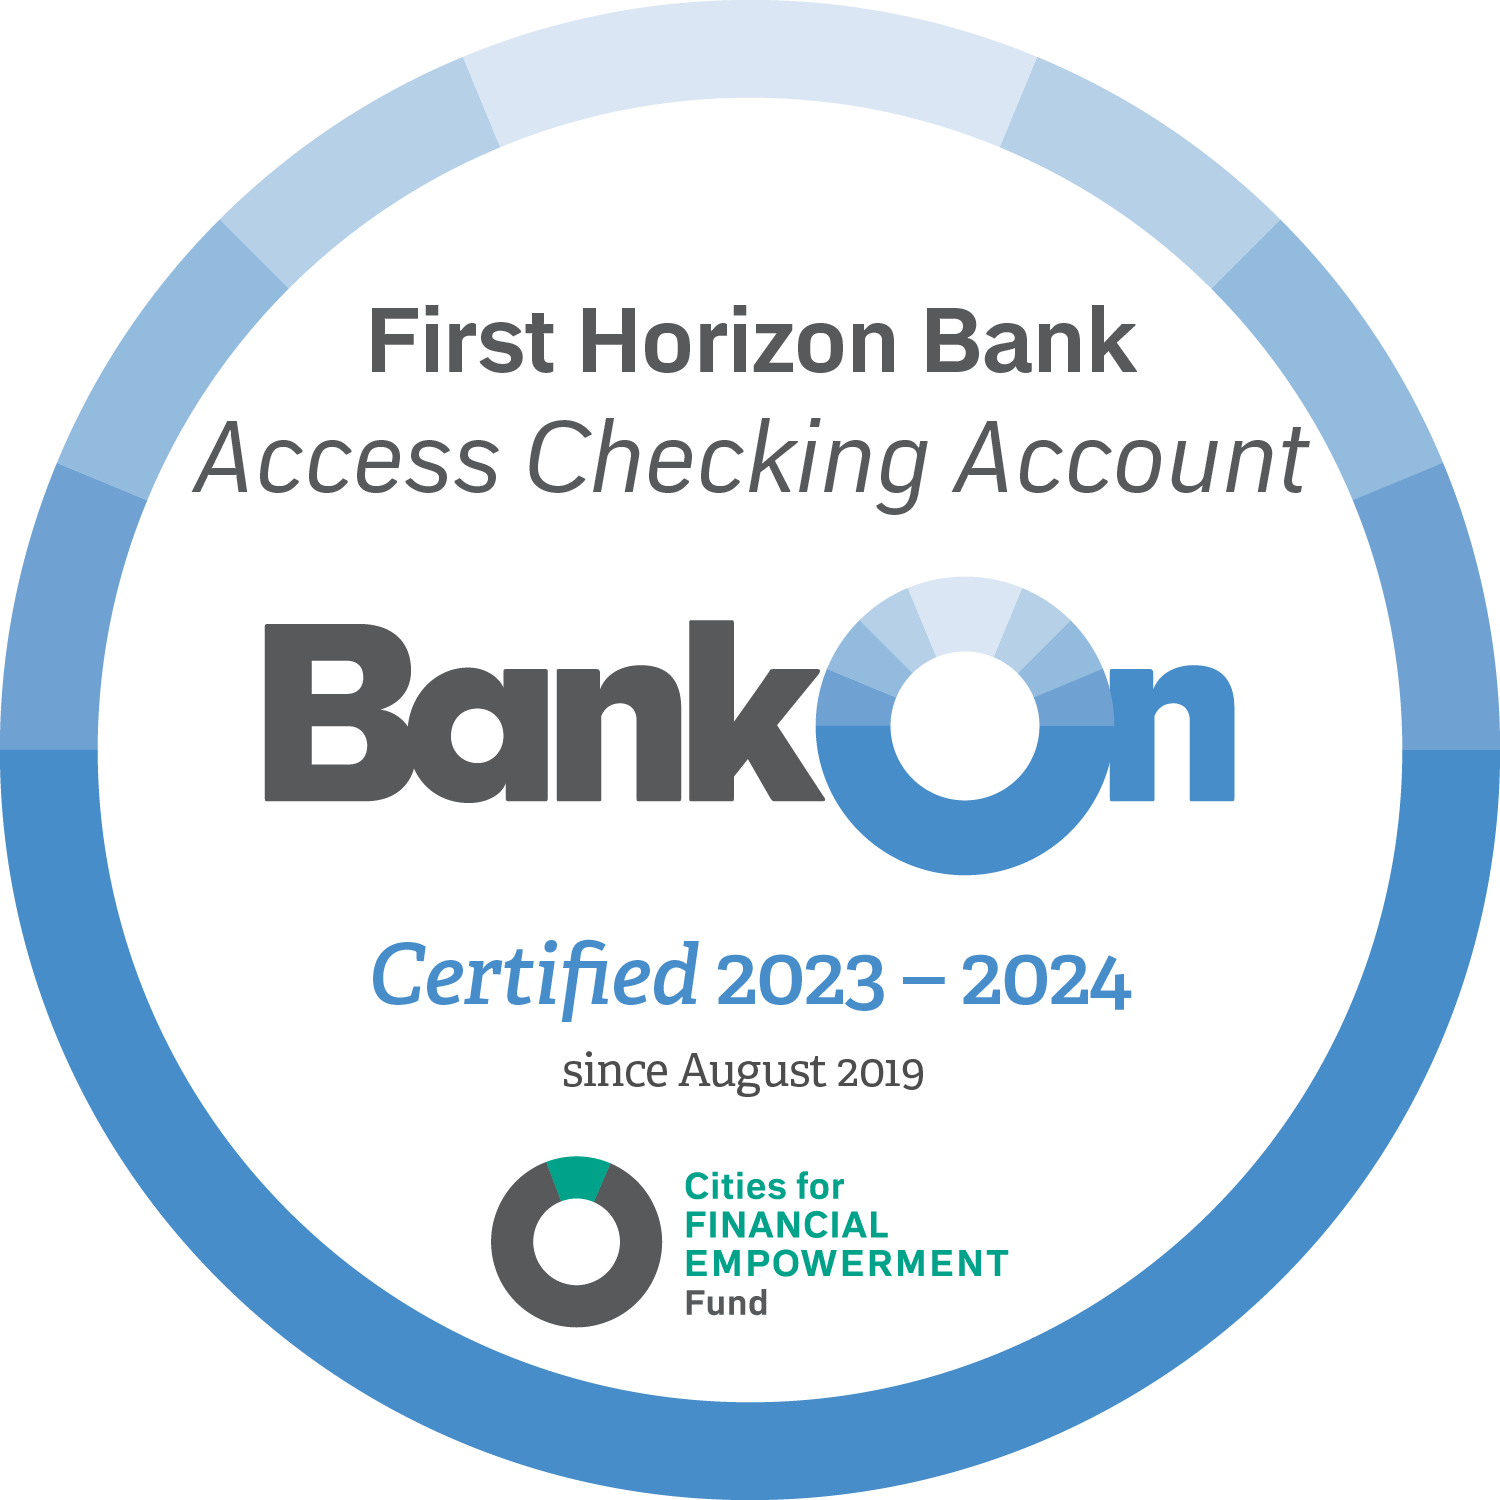 First Horizon Access Checking Certified